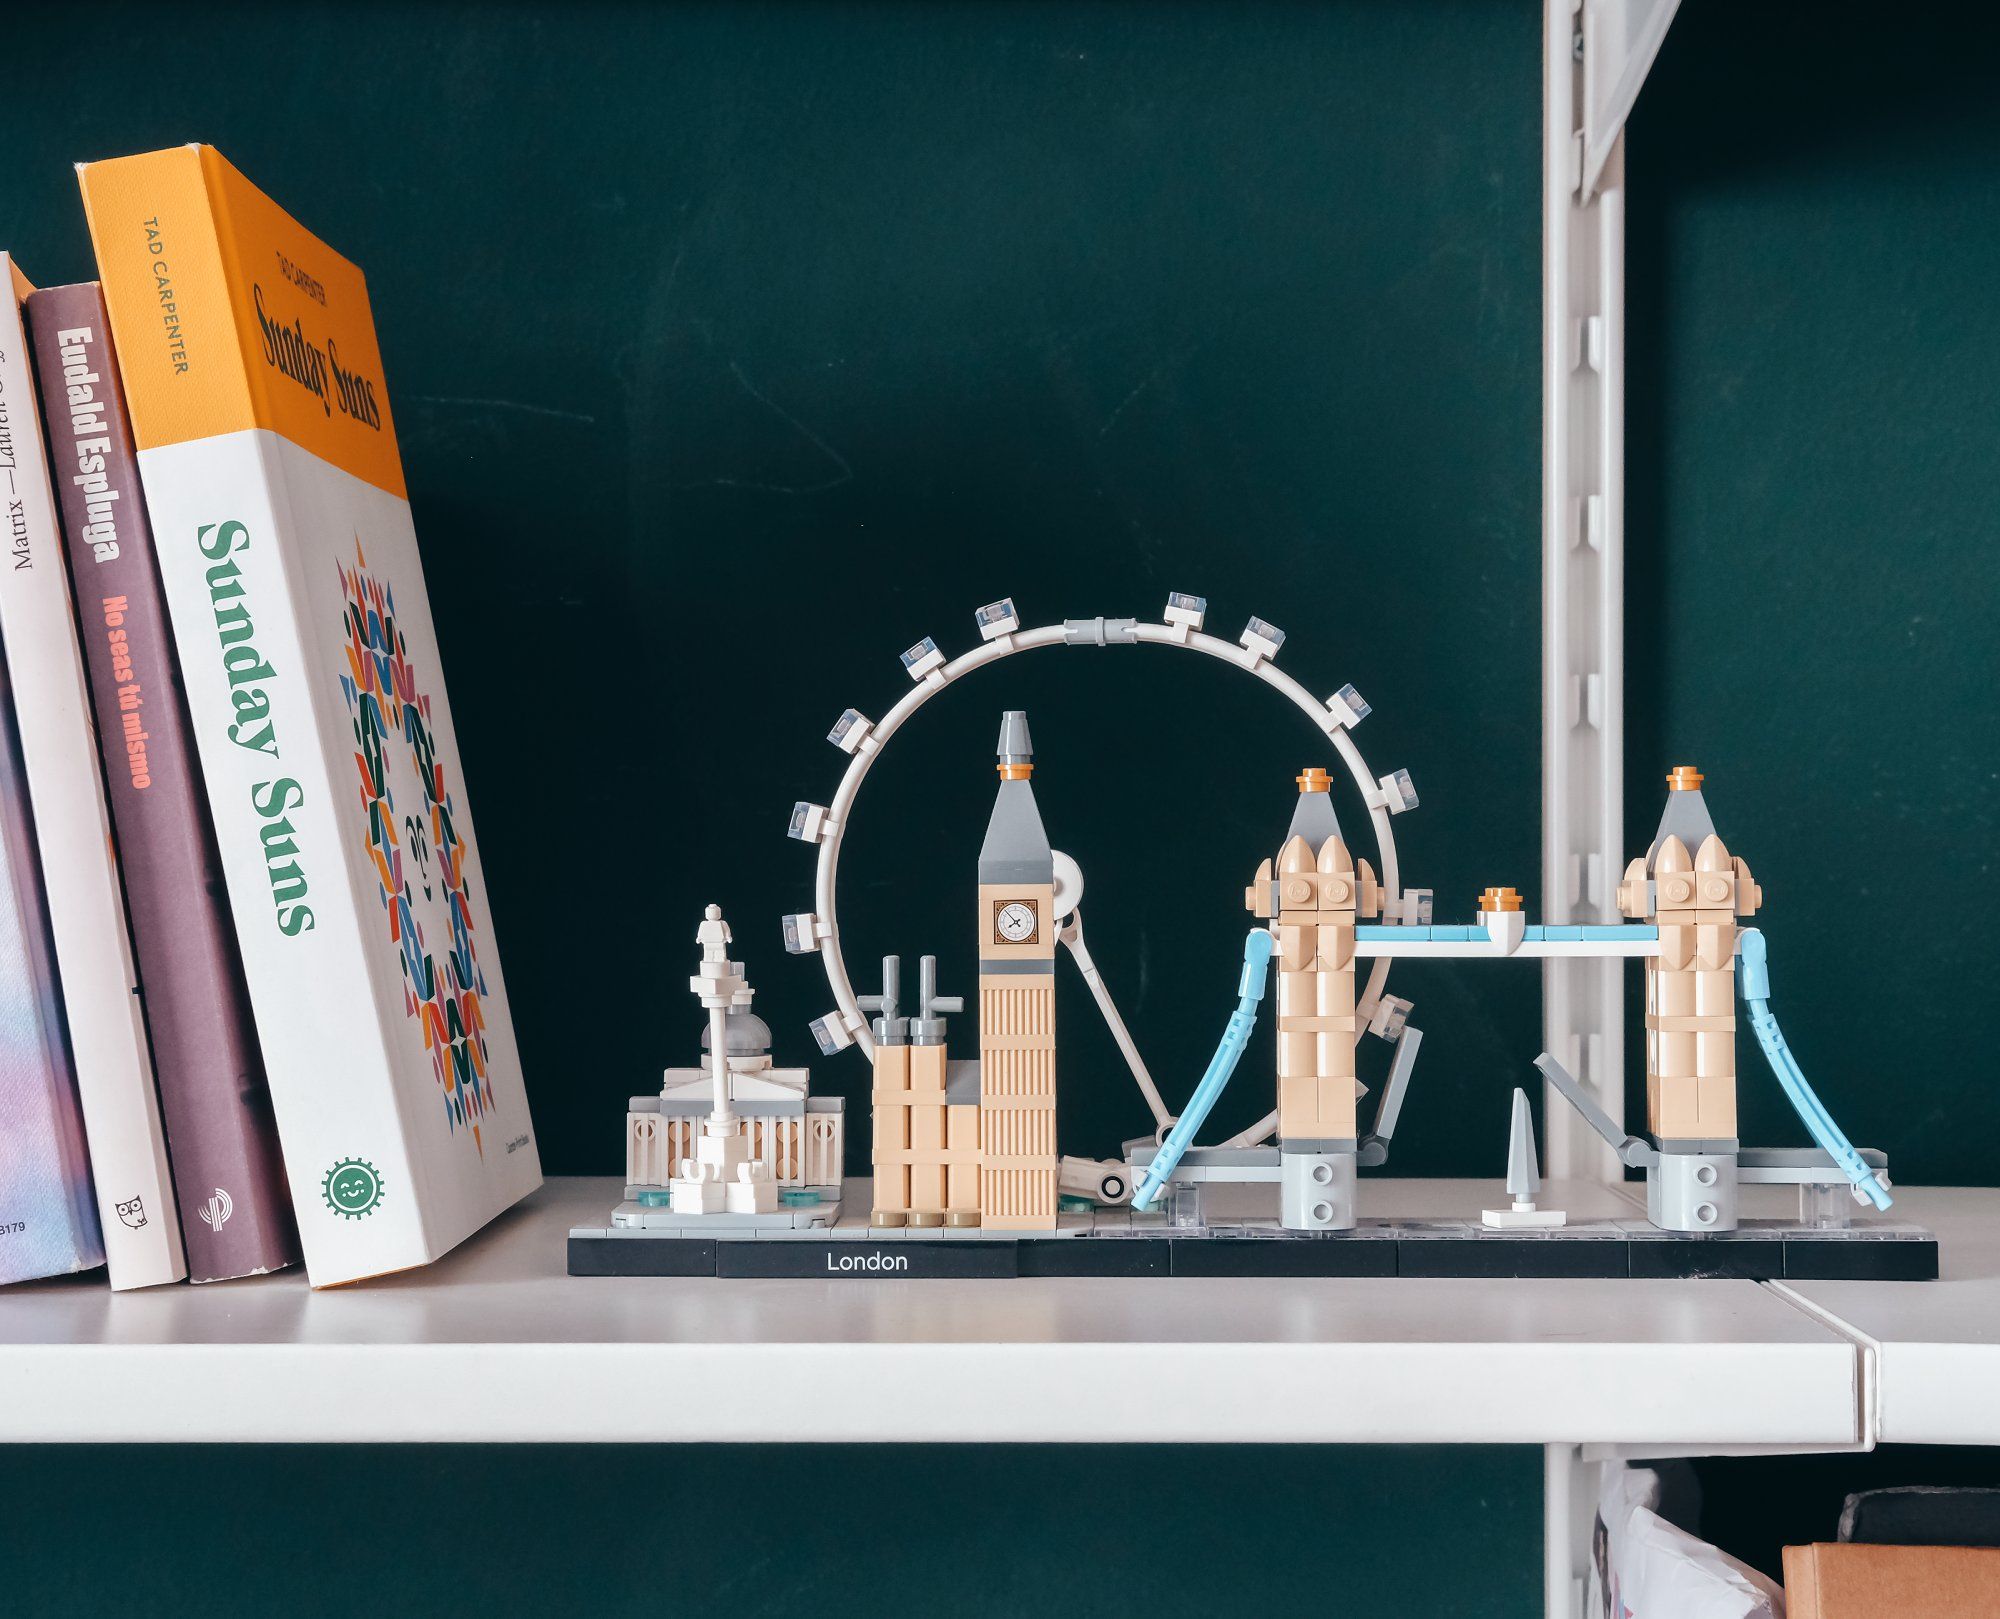 A LEGO Architecture London construction set and some books, including Sunday Suns by Tad Carpenter, on a floating shelf